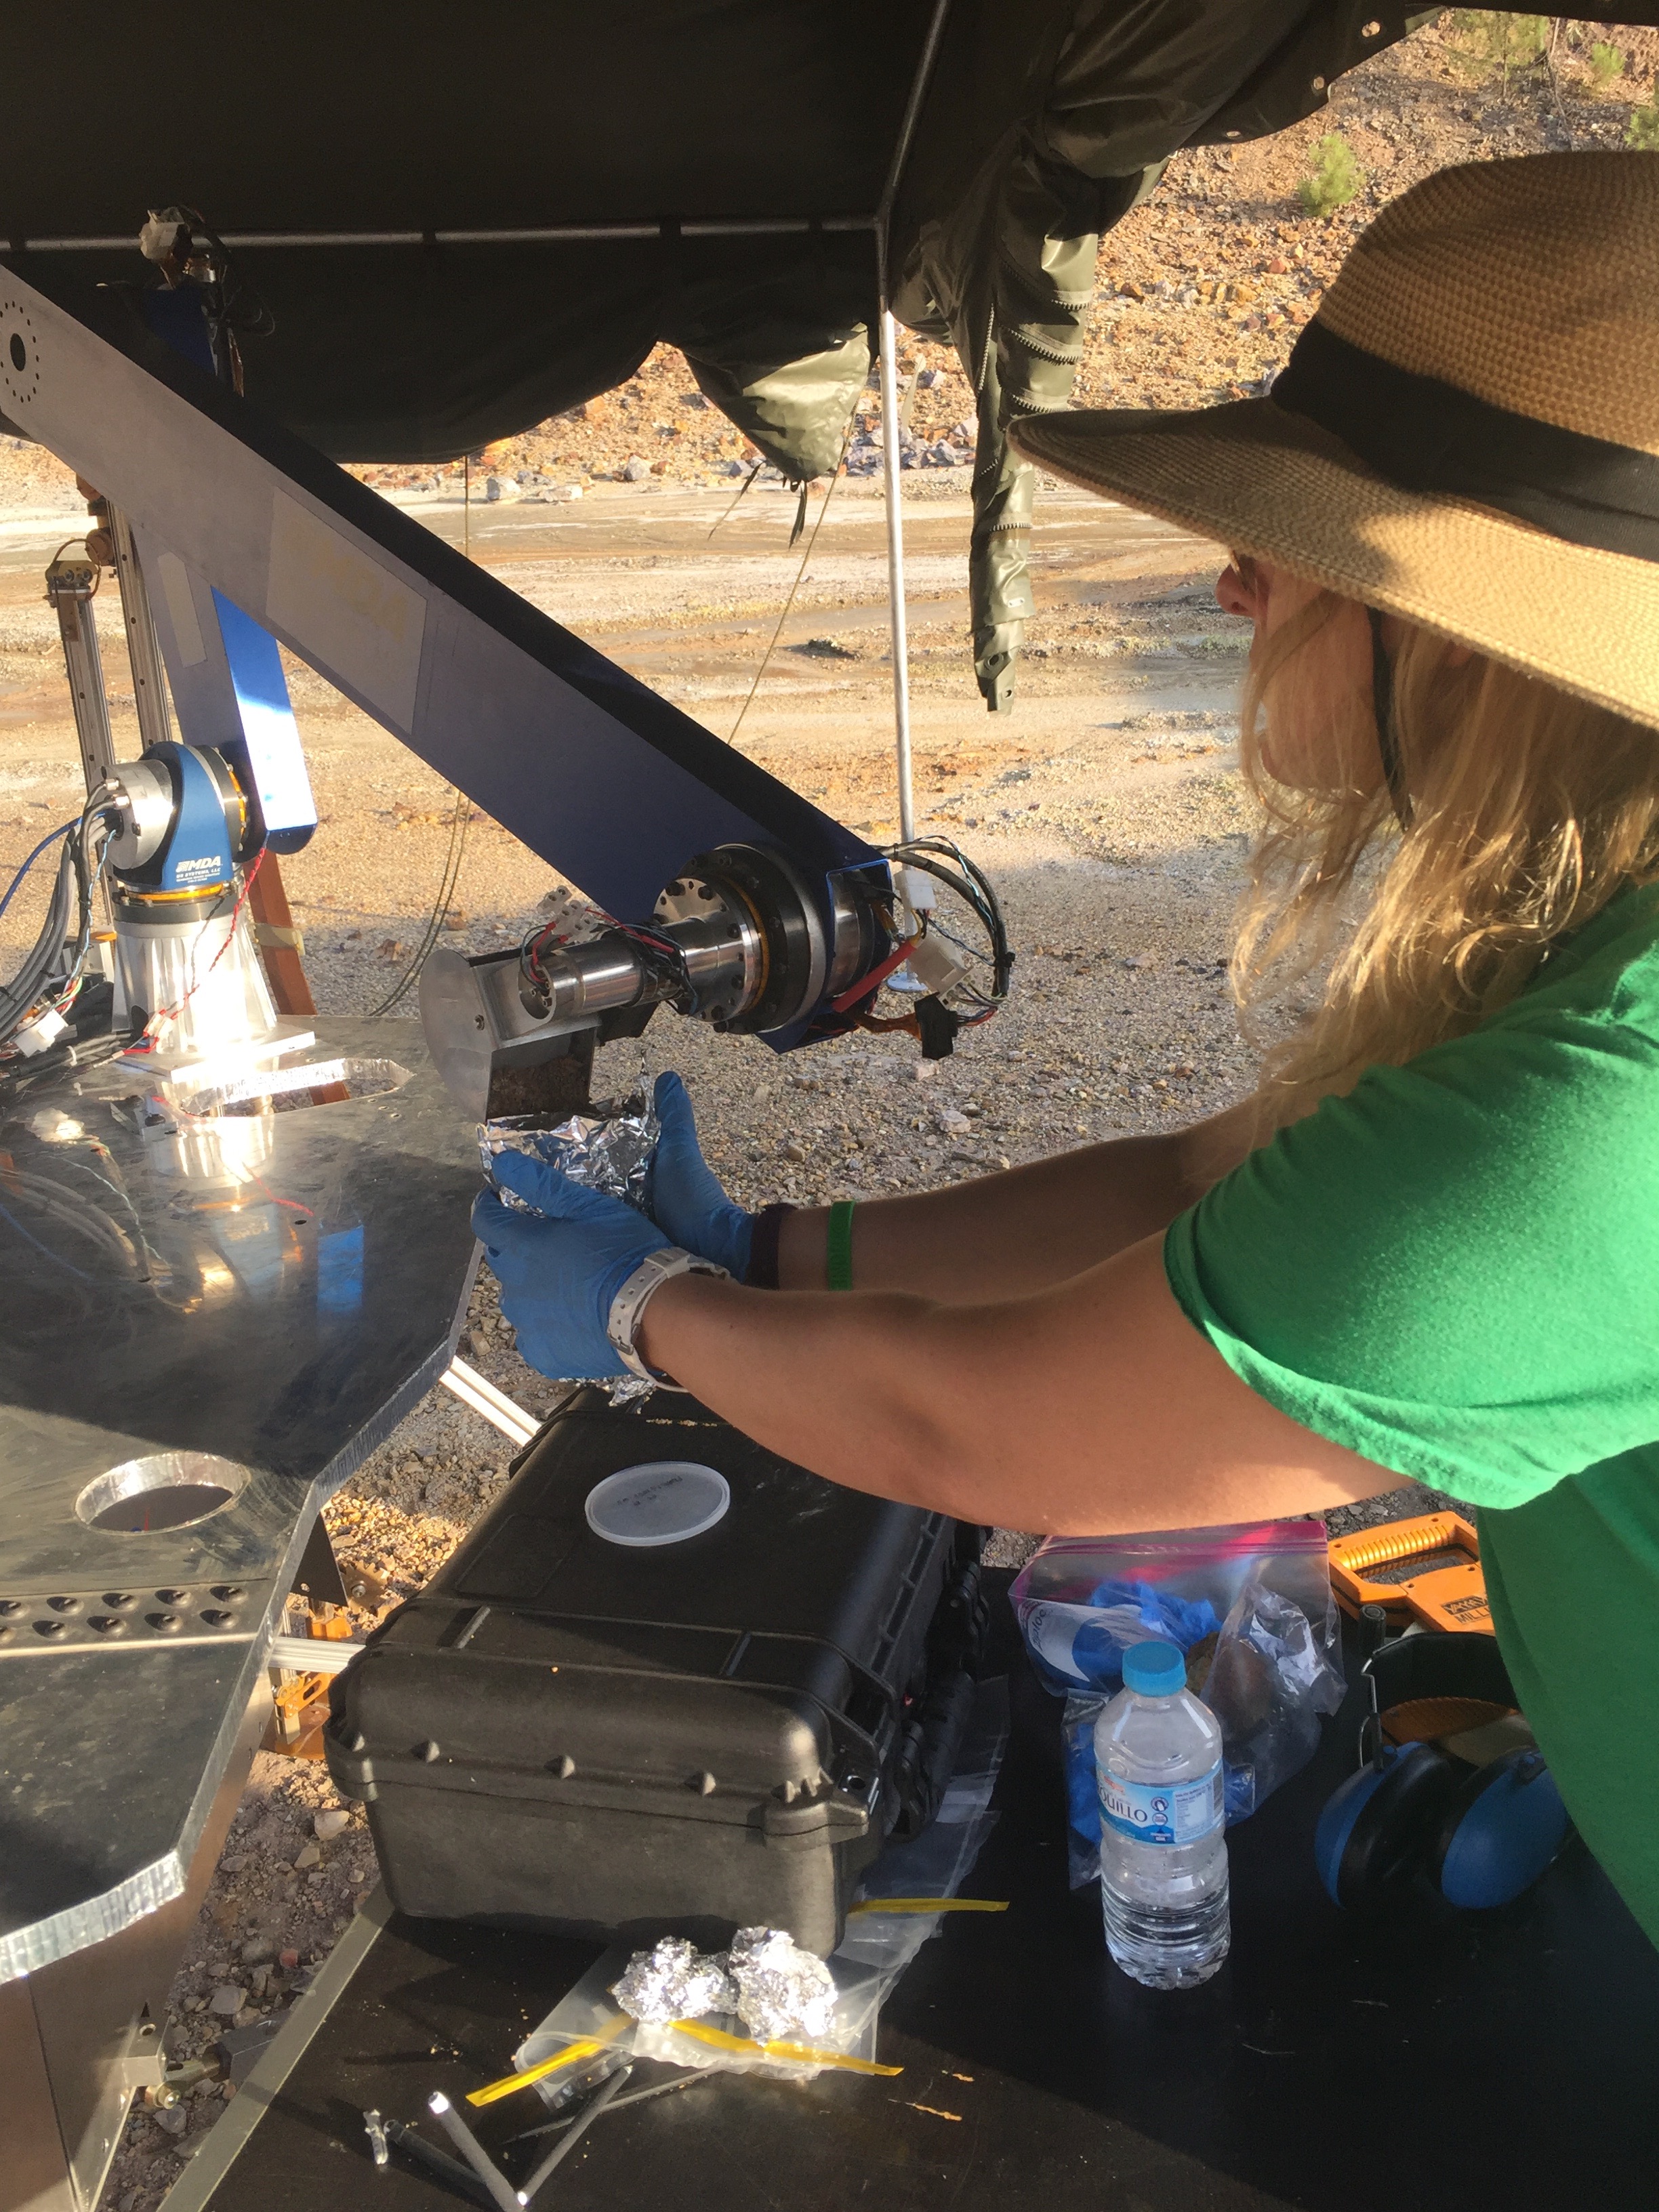 Deniz Burnham at a field test of drilling and sampling prototype instruments, as part of the Life-detection Mars Analog Project's deployment at the Rio Tinto, Spain, Mars-analog site in the summer of 2017.